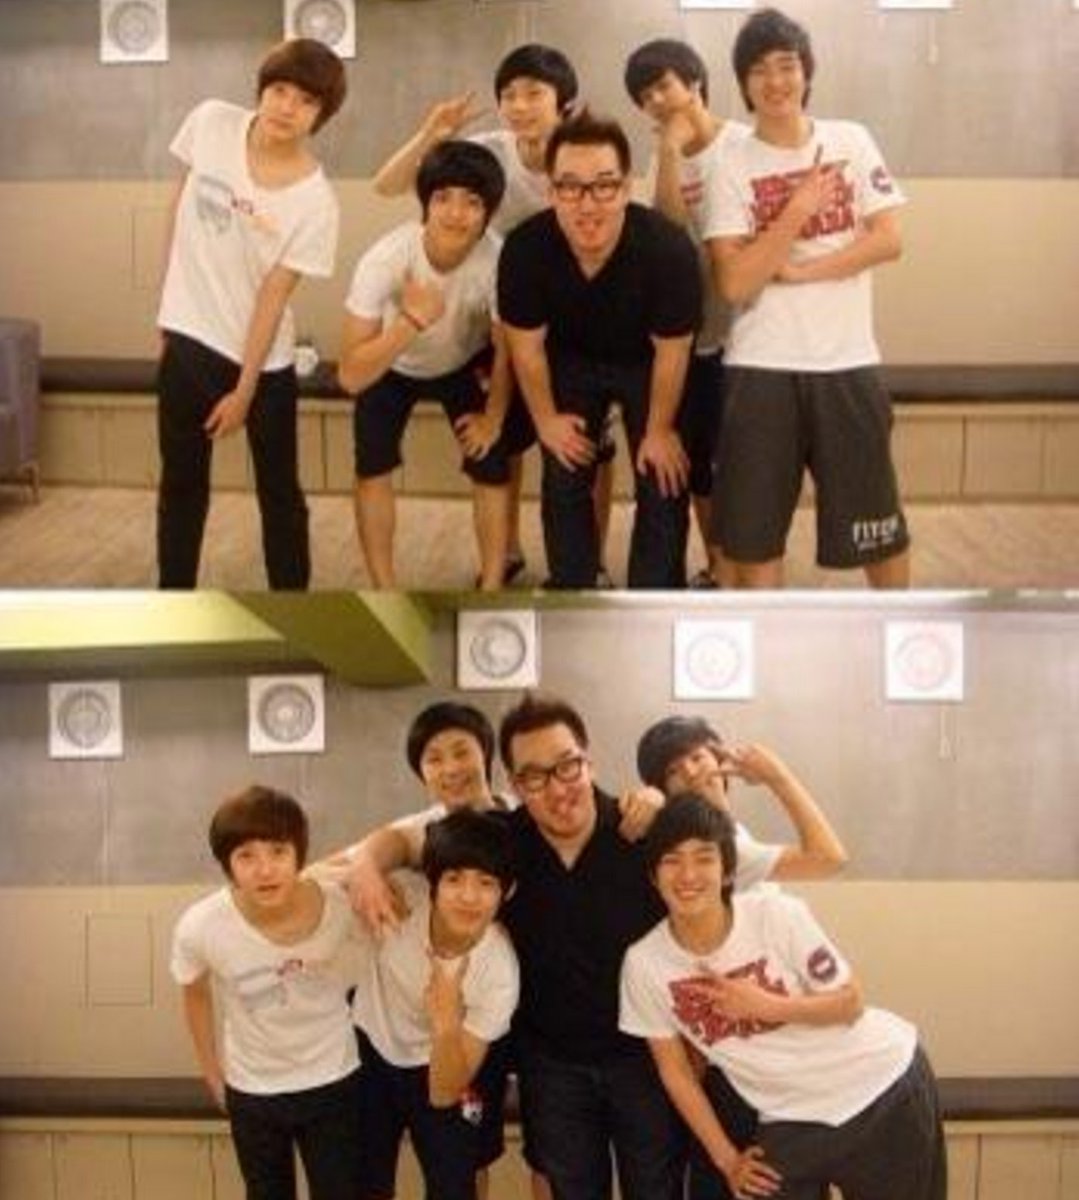 Seungcheol & Jihoon actually trained with NU’EST, so they’re close. Here are some pre-debut photos of them together: